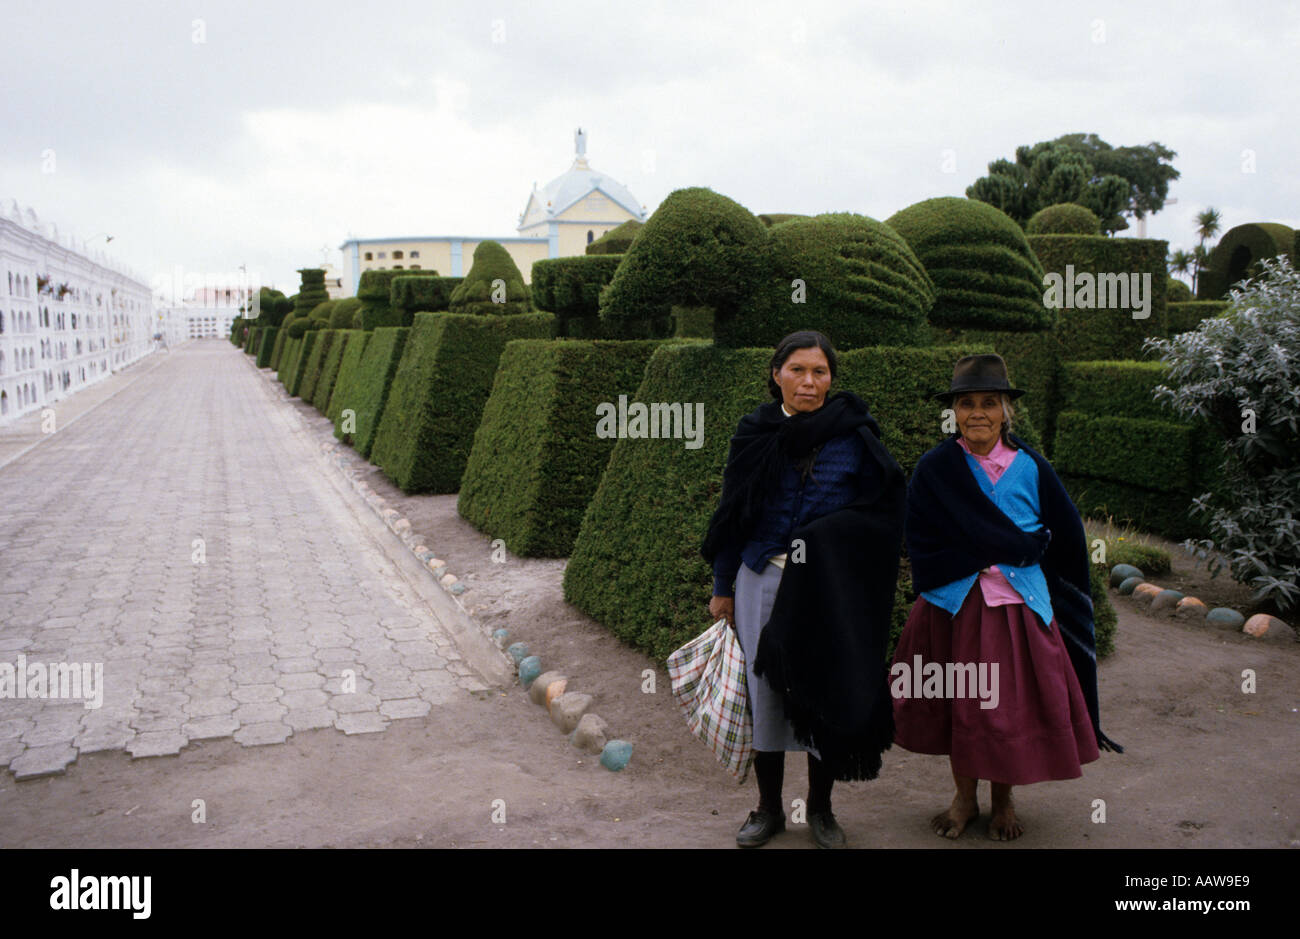 Cemetery at Tulcan, Colombia near the border with Ecuador, Ecuadorian Indians and topiary hedges Stock Photo